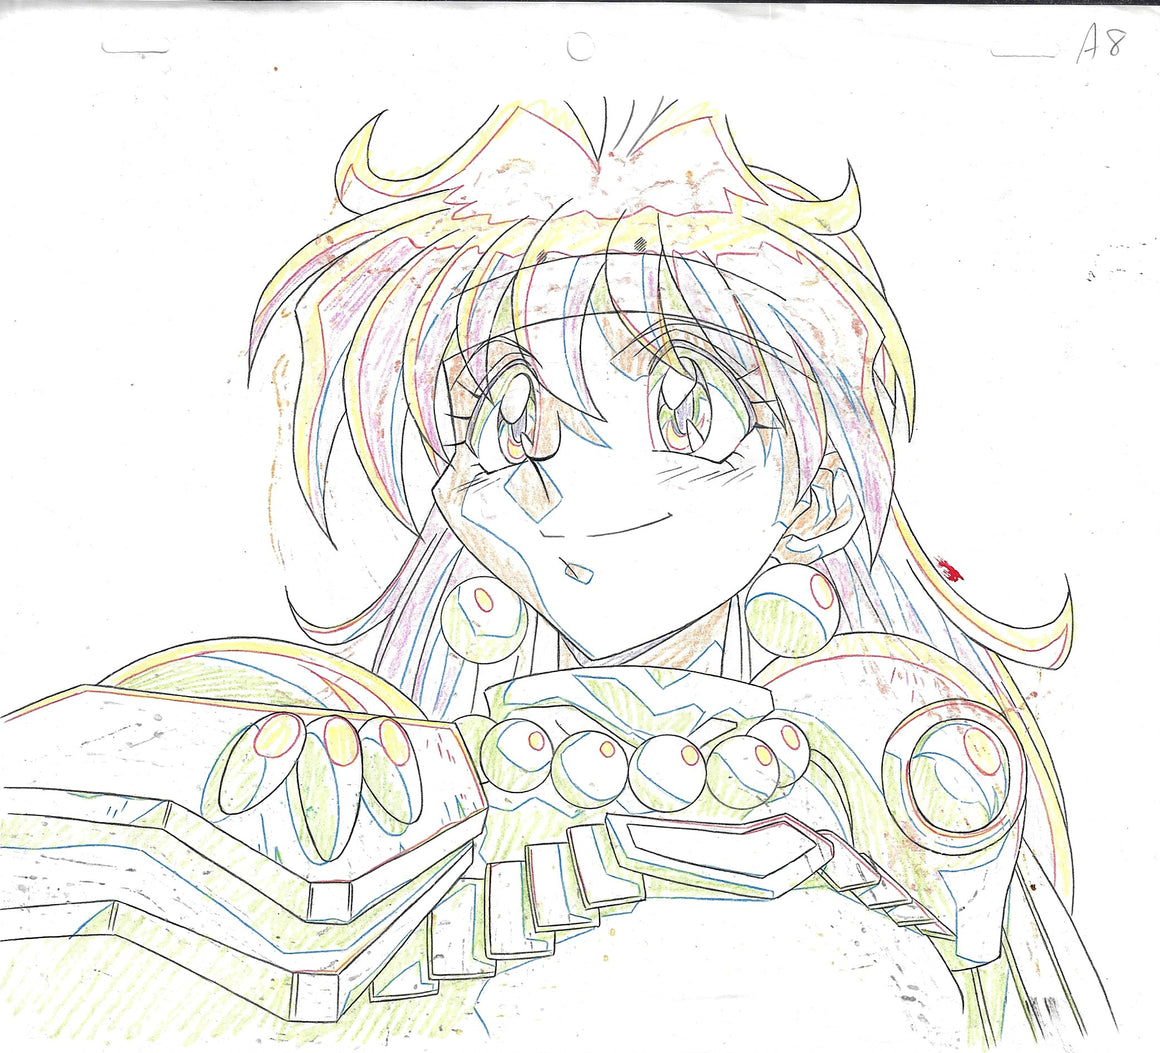 Slayers - Lina Inverse smiling - 1-layer Production Cel w/ Douga Sketch